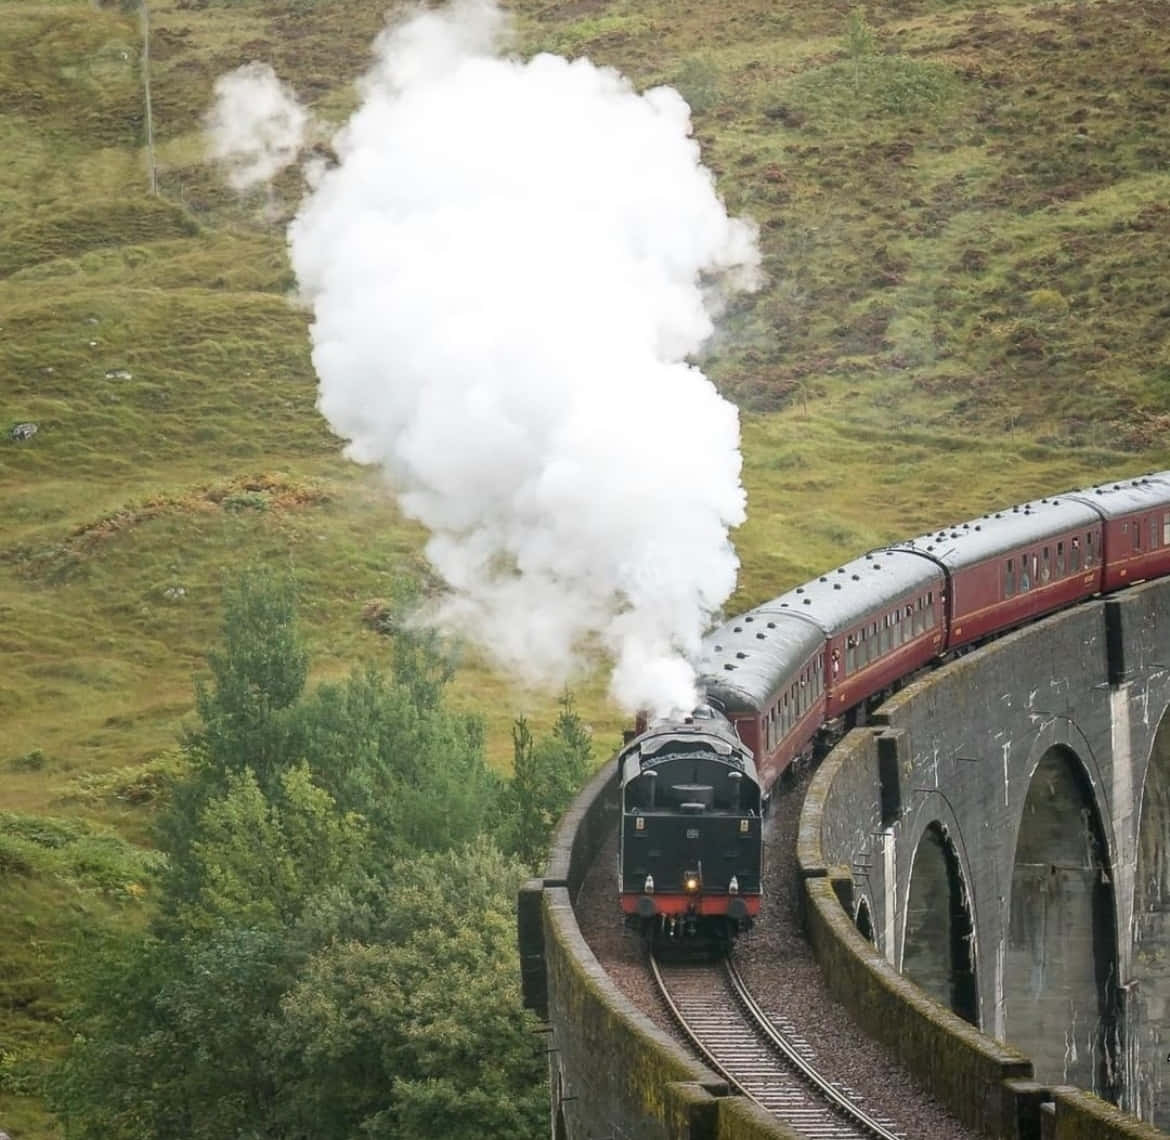 The Hogwarts Express departs for another magical journey Wallpaper